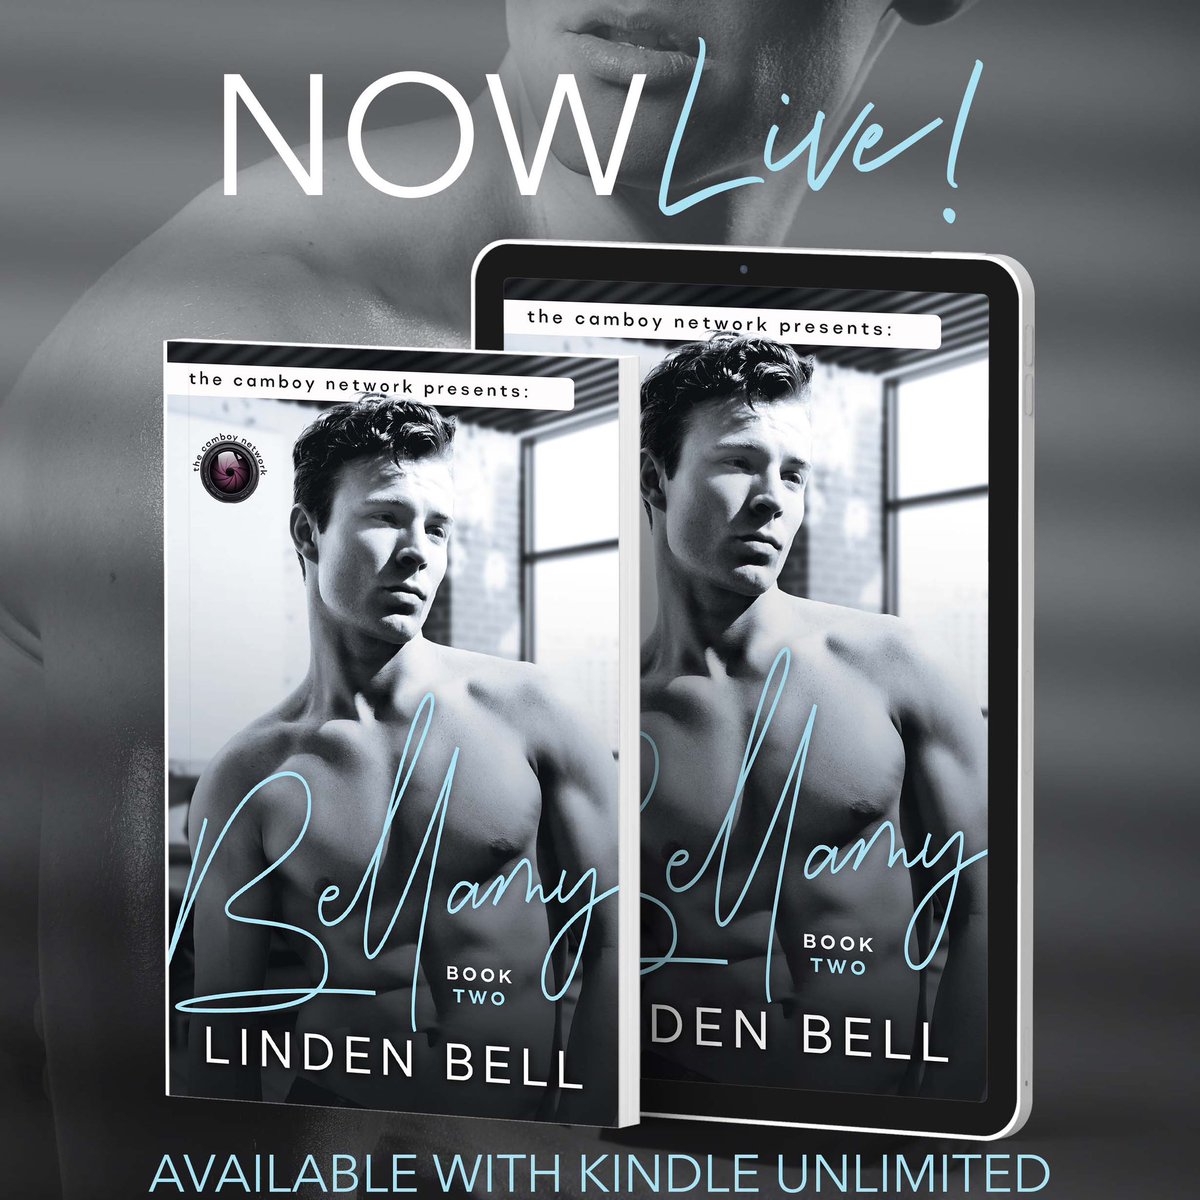 #NowLive Bellamy is here, the next book in The Camboy Network by Linden Bell!
#PurchaseNow: geni.us/bellamyevents
#MMRomance #EnemiestoLovers #LindenBell @Chaotic_Creativ